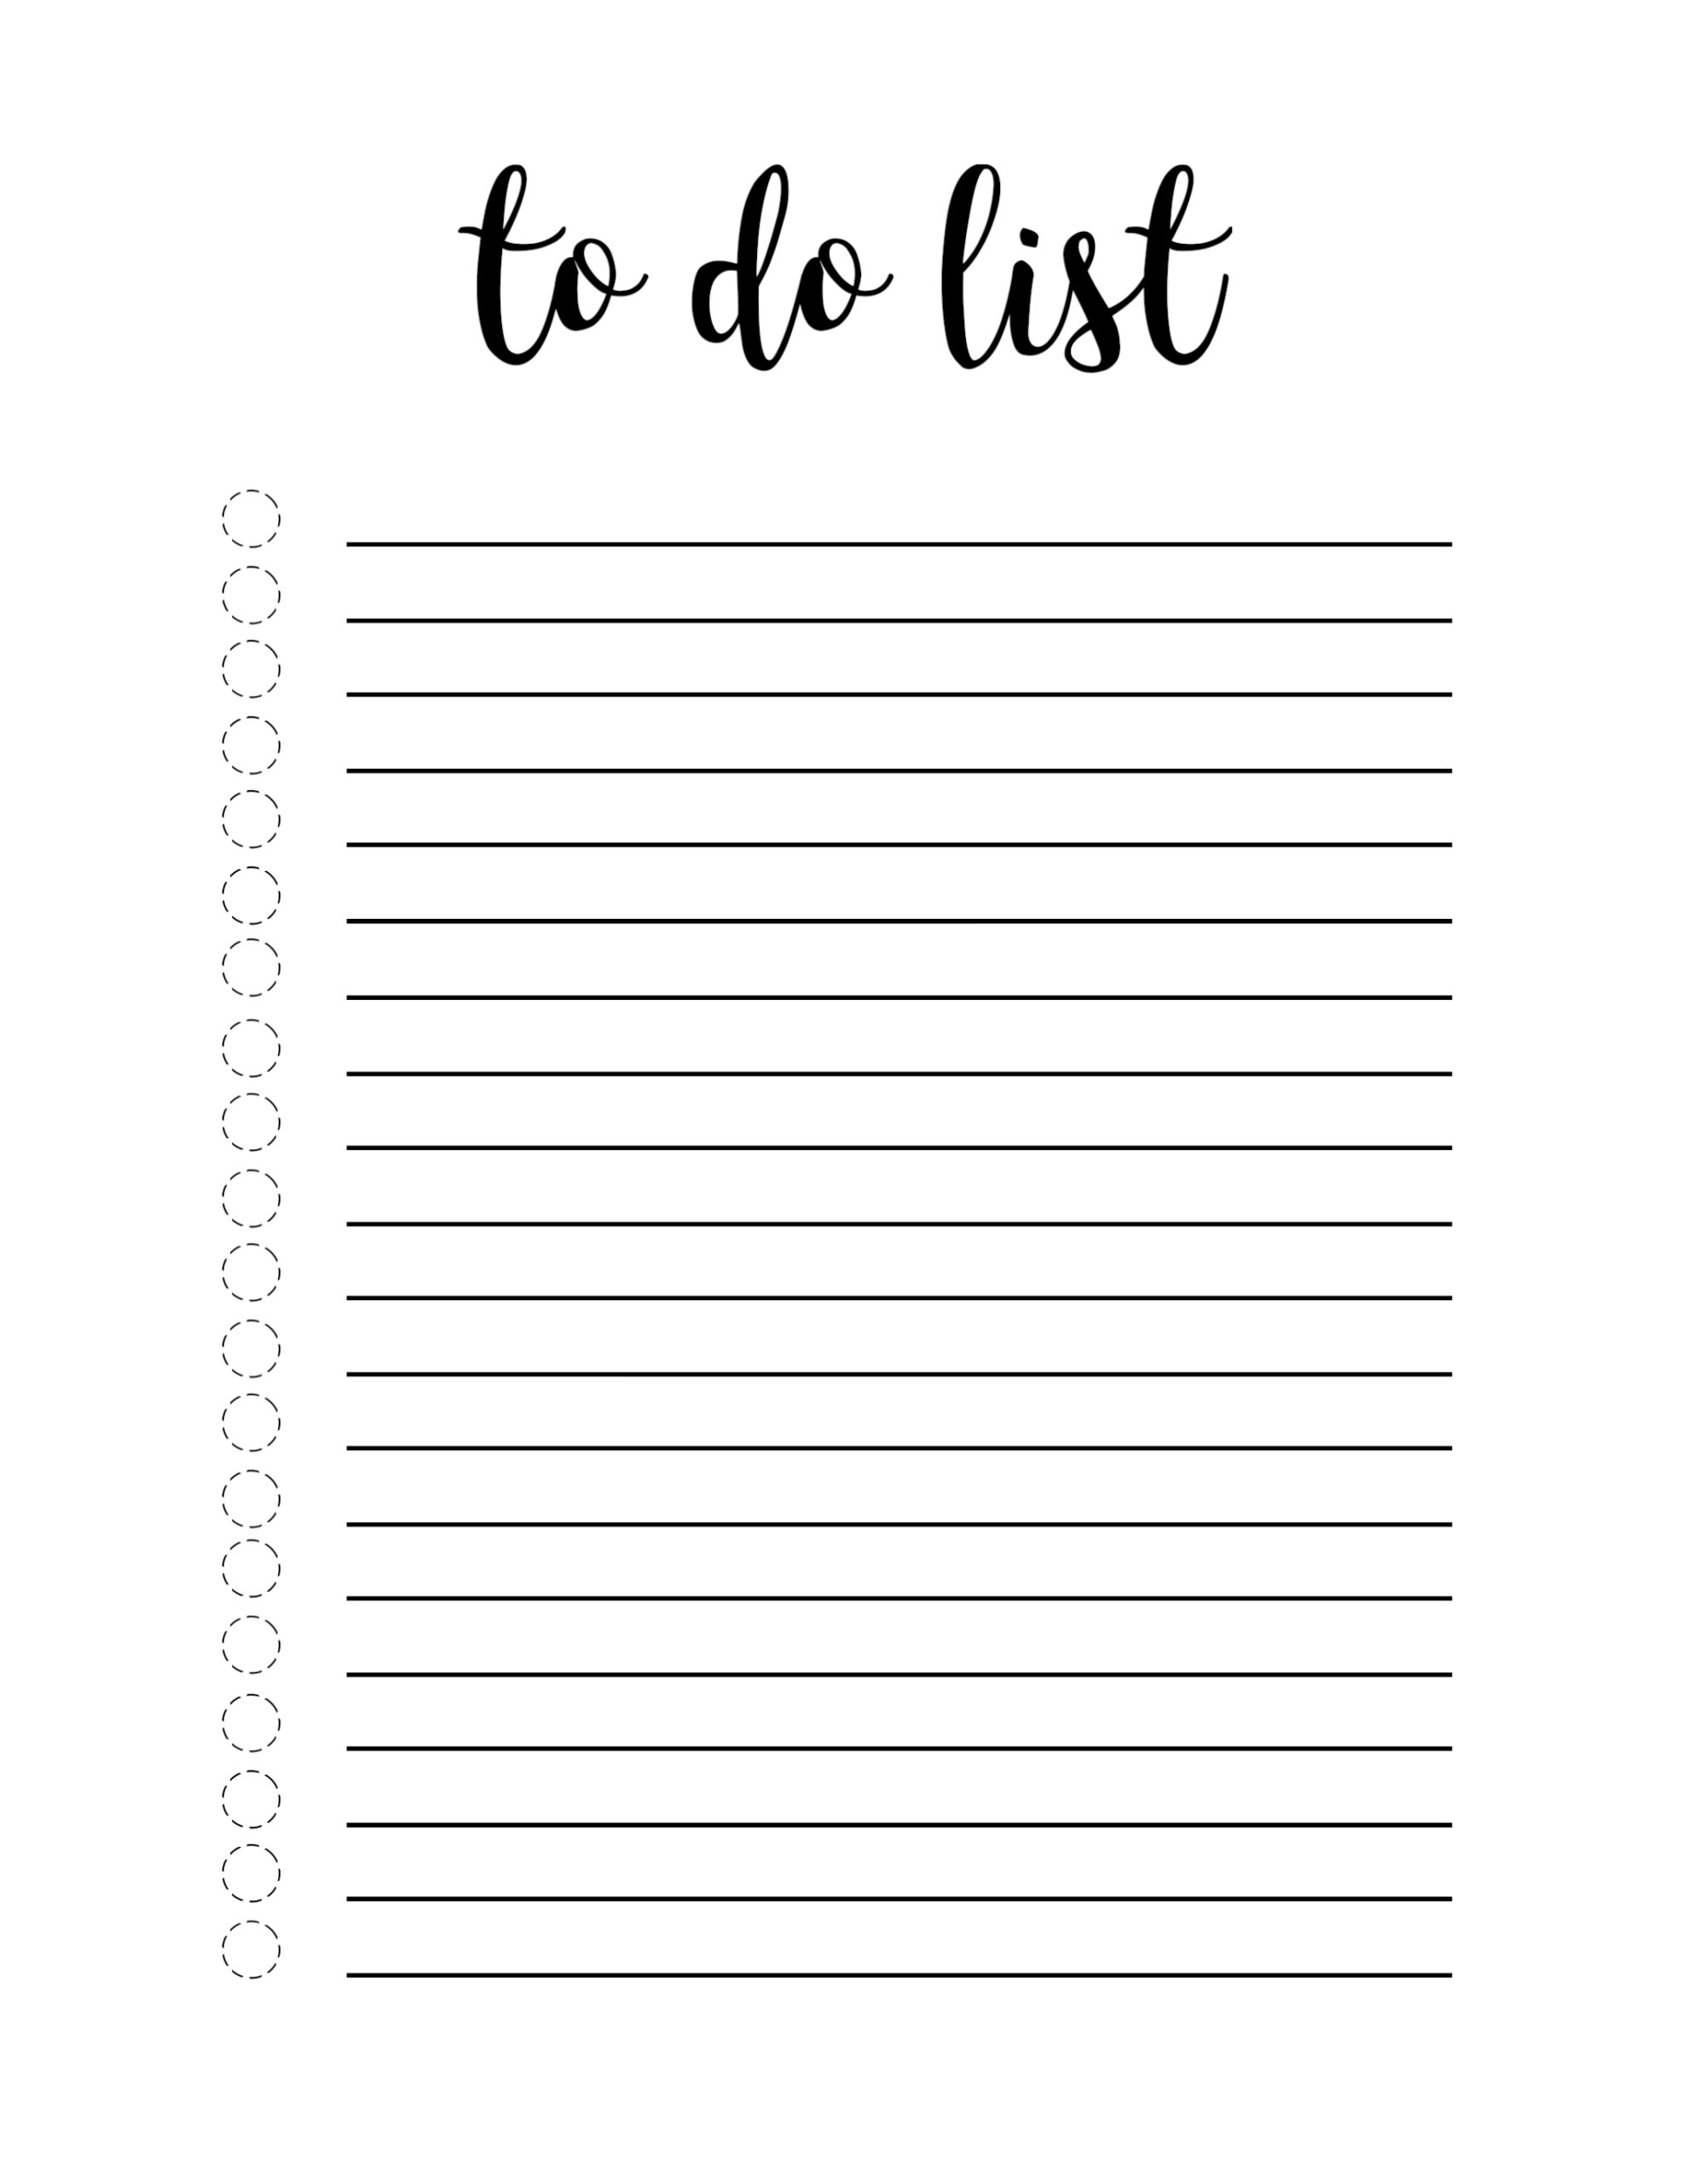 Todo List Template from www.papertraildesign.com